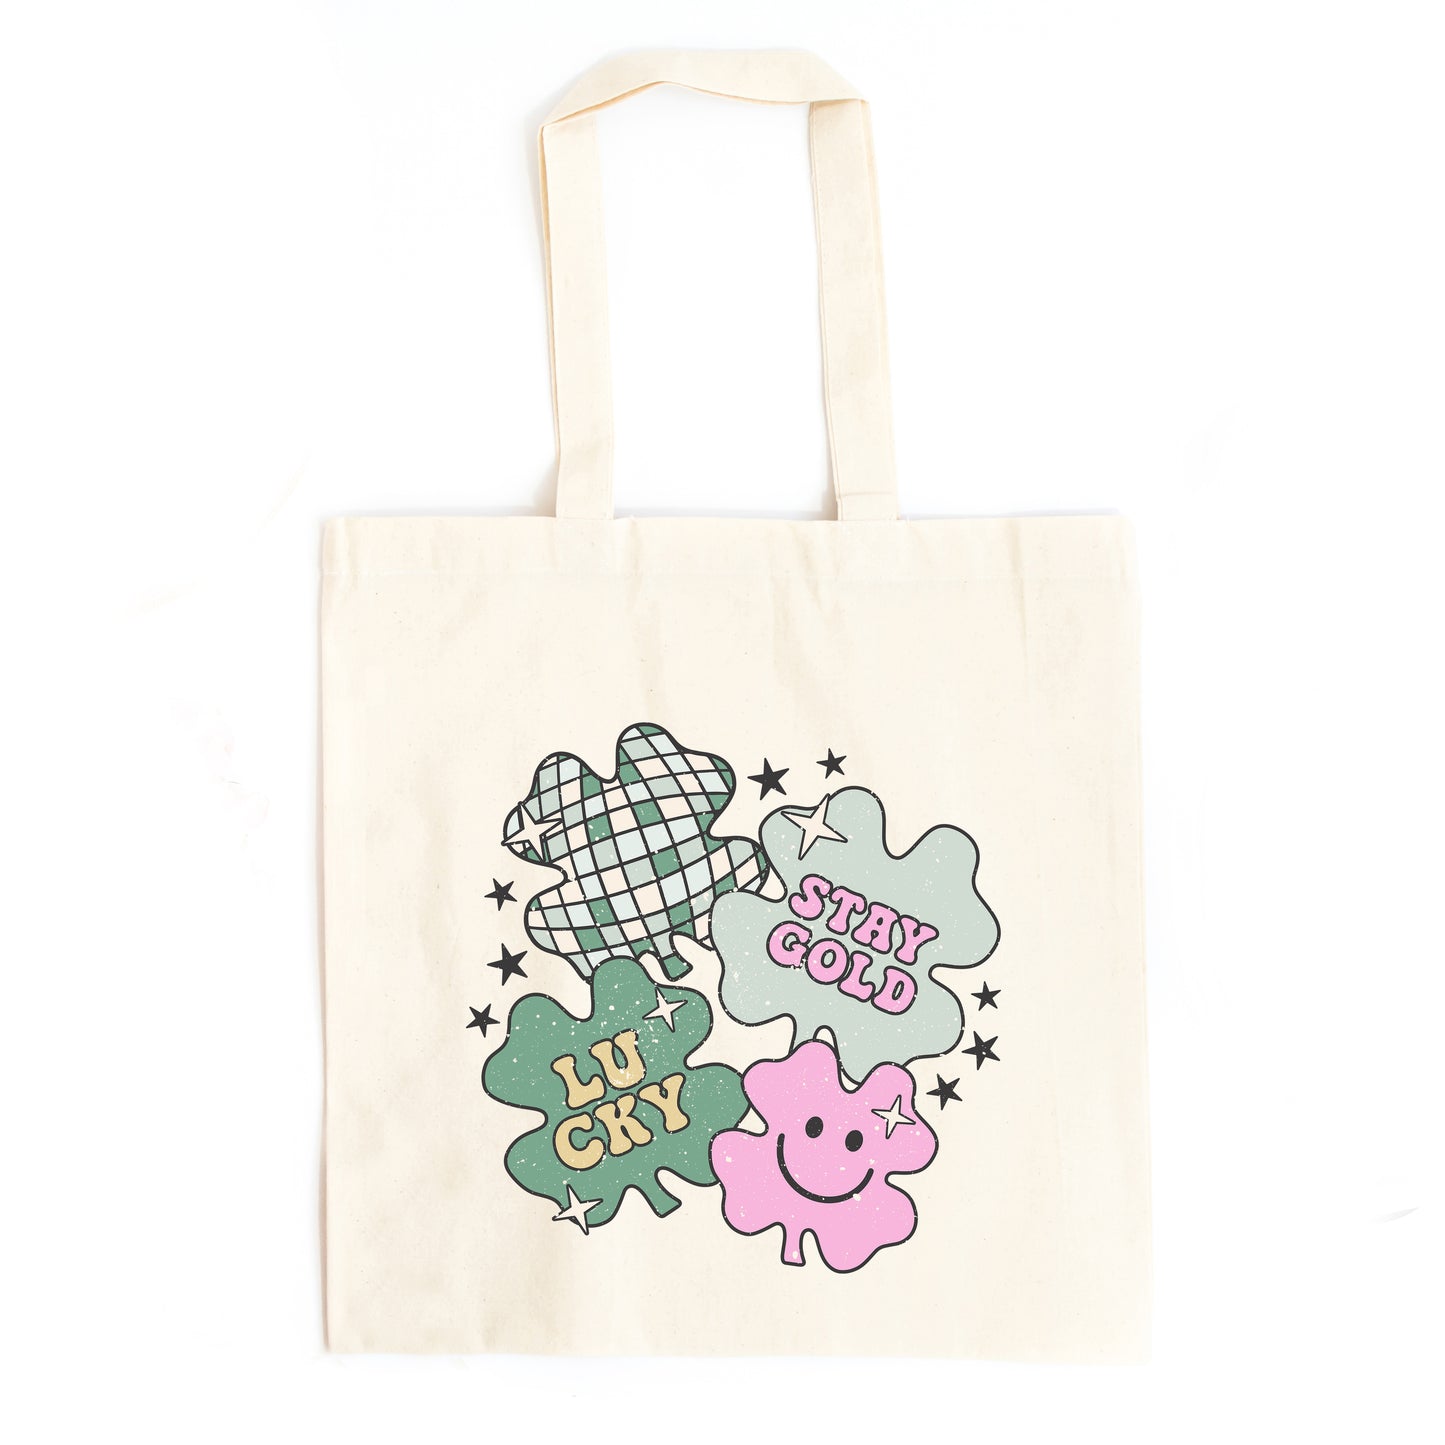 Stay Gold Lucky Shamrocks | Tote Bag